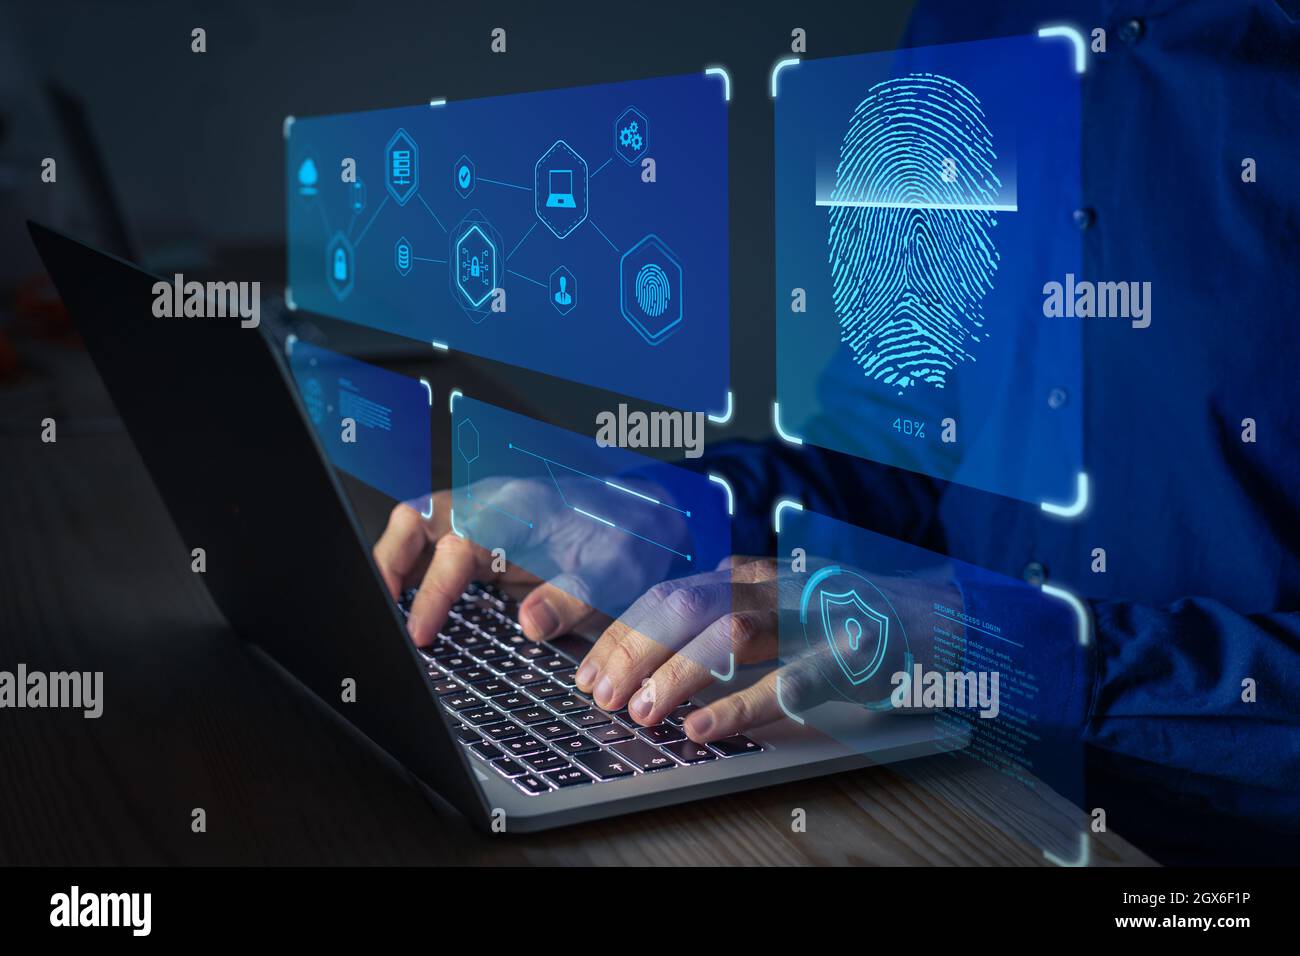 Fingerprint scan for secure access to protected data network with biometrics. Person using finger print authentication technology on laptop computer t Stock Photo